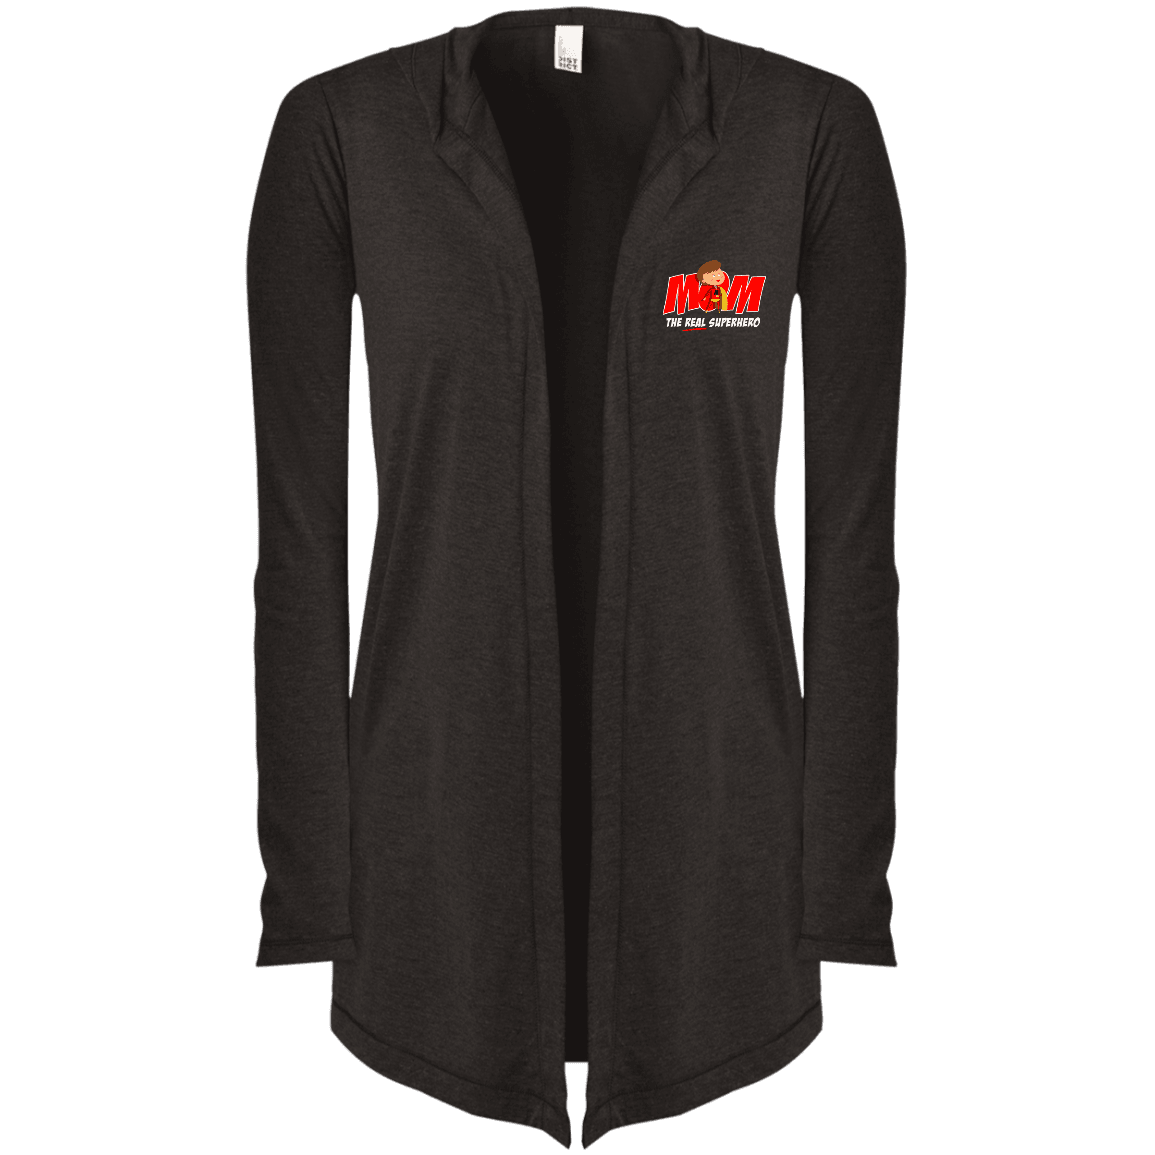 Designs by MyUtopia Shout Out:Mom The Real Superhero Embroidered Women's Hooded Cardigan,Black Frost / X-Small,Sweatshirts